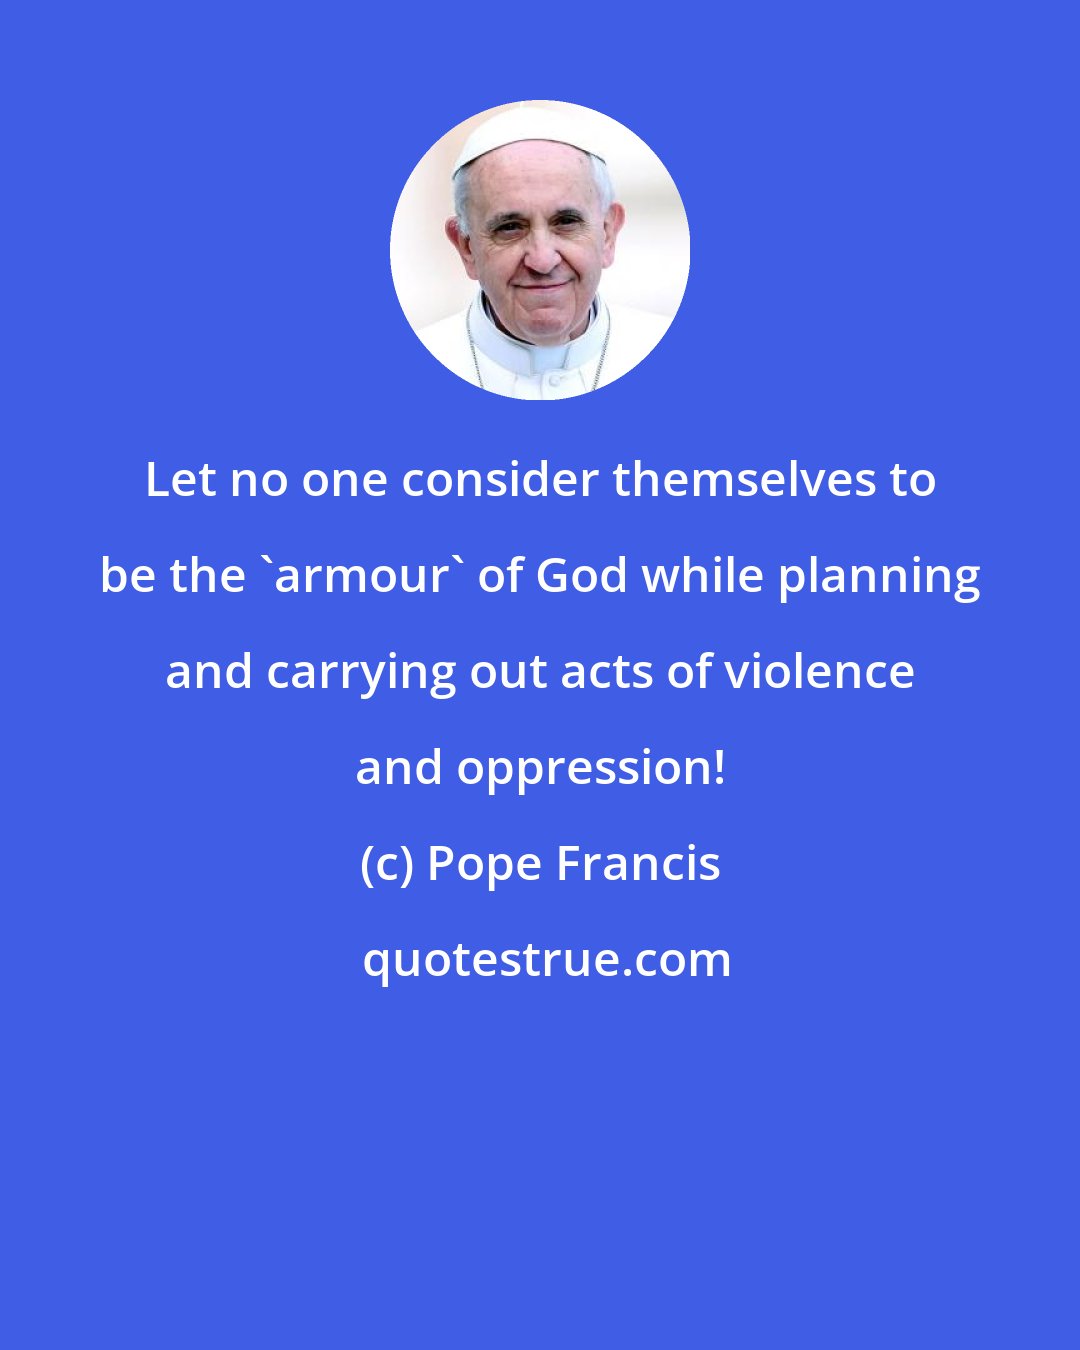 Pope Francis: Let no one consider themselves to be the 'armour' of God while planning and carrying out acts of violence and oppression!